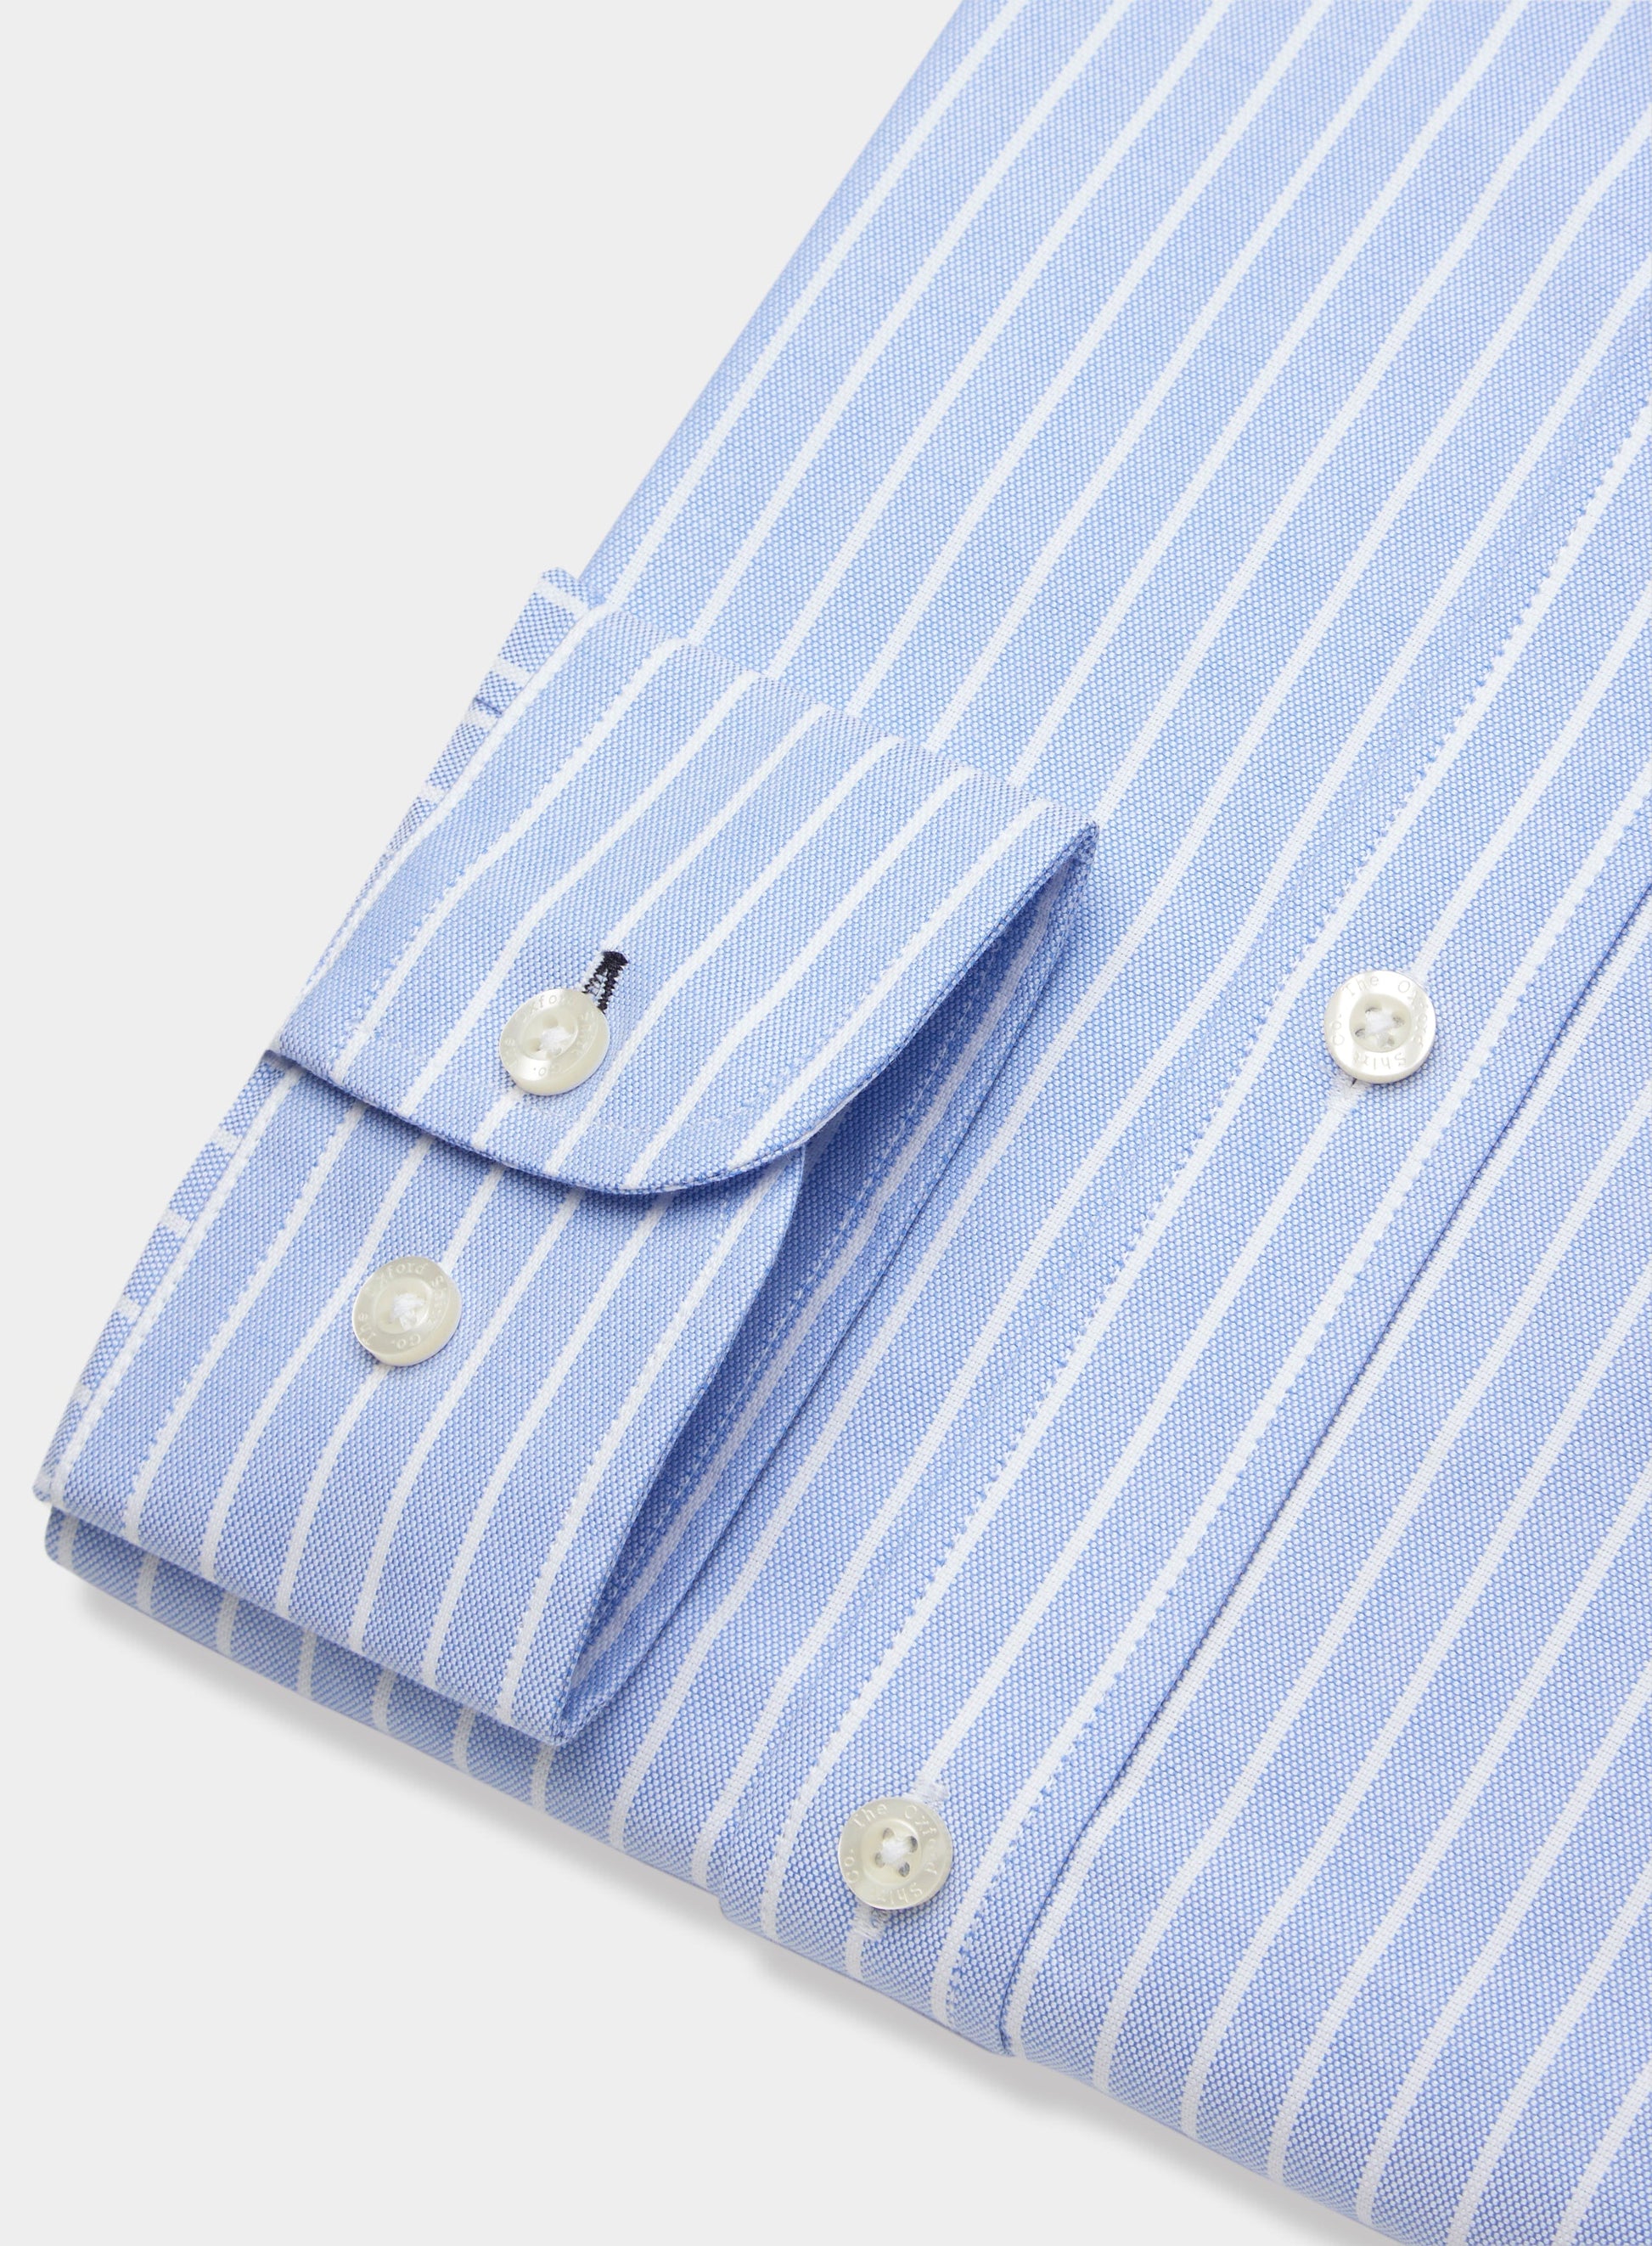 Classic Shirt in Blue and White Stripe